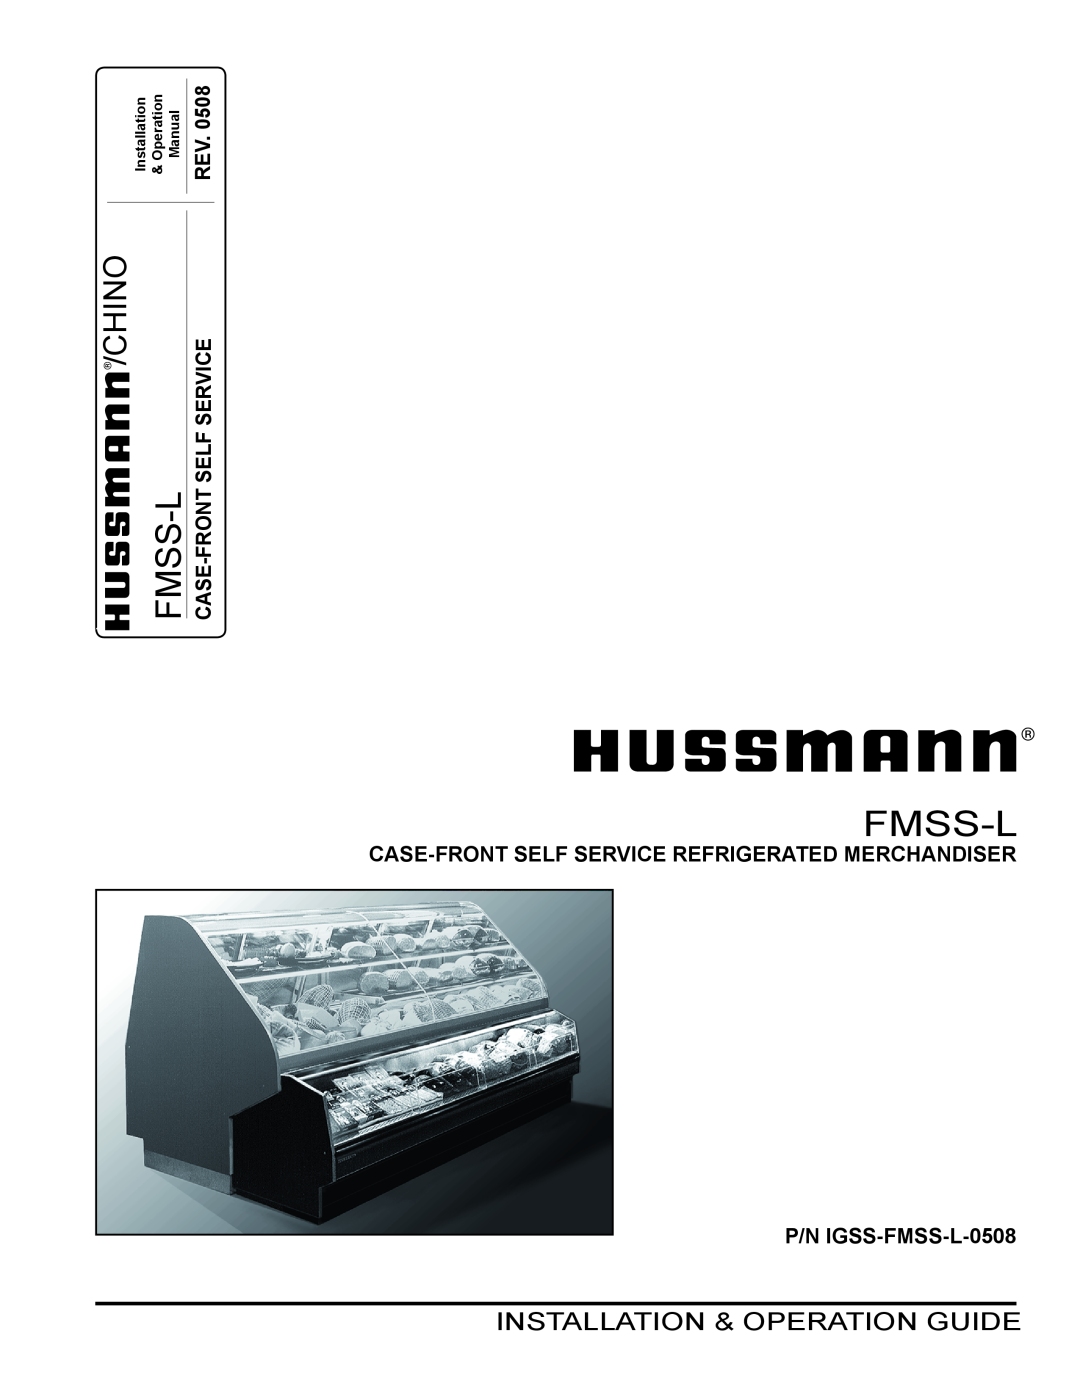 hussman operation manual Chino, Case-front Self Service Refrigerated Merchandiser, P/N IGSS-FMSS-L-0708, Fmss-L, Manual 